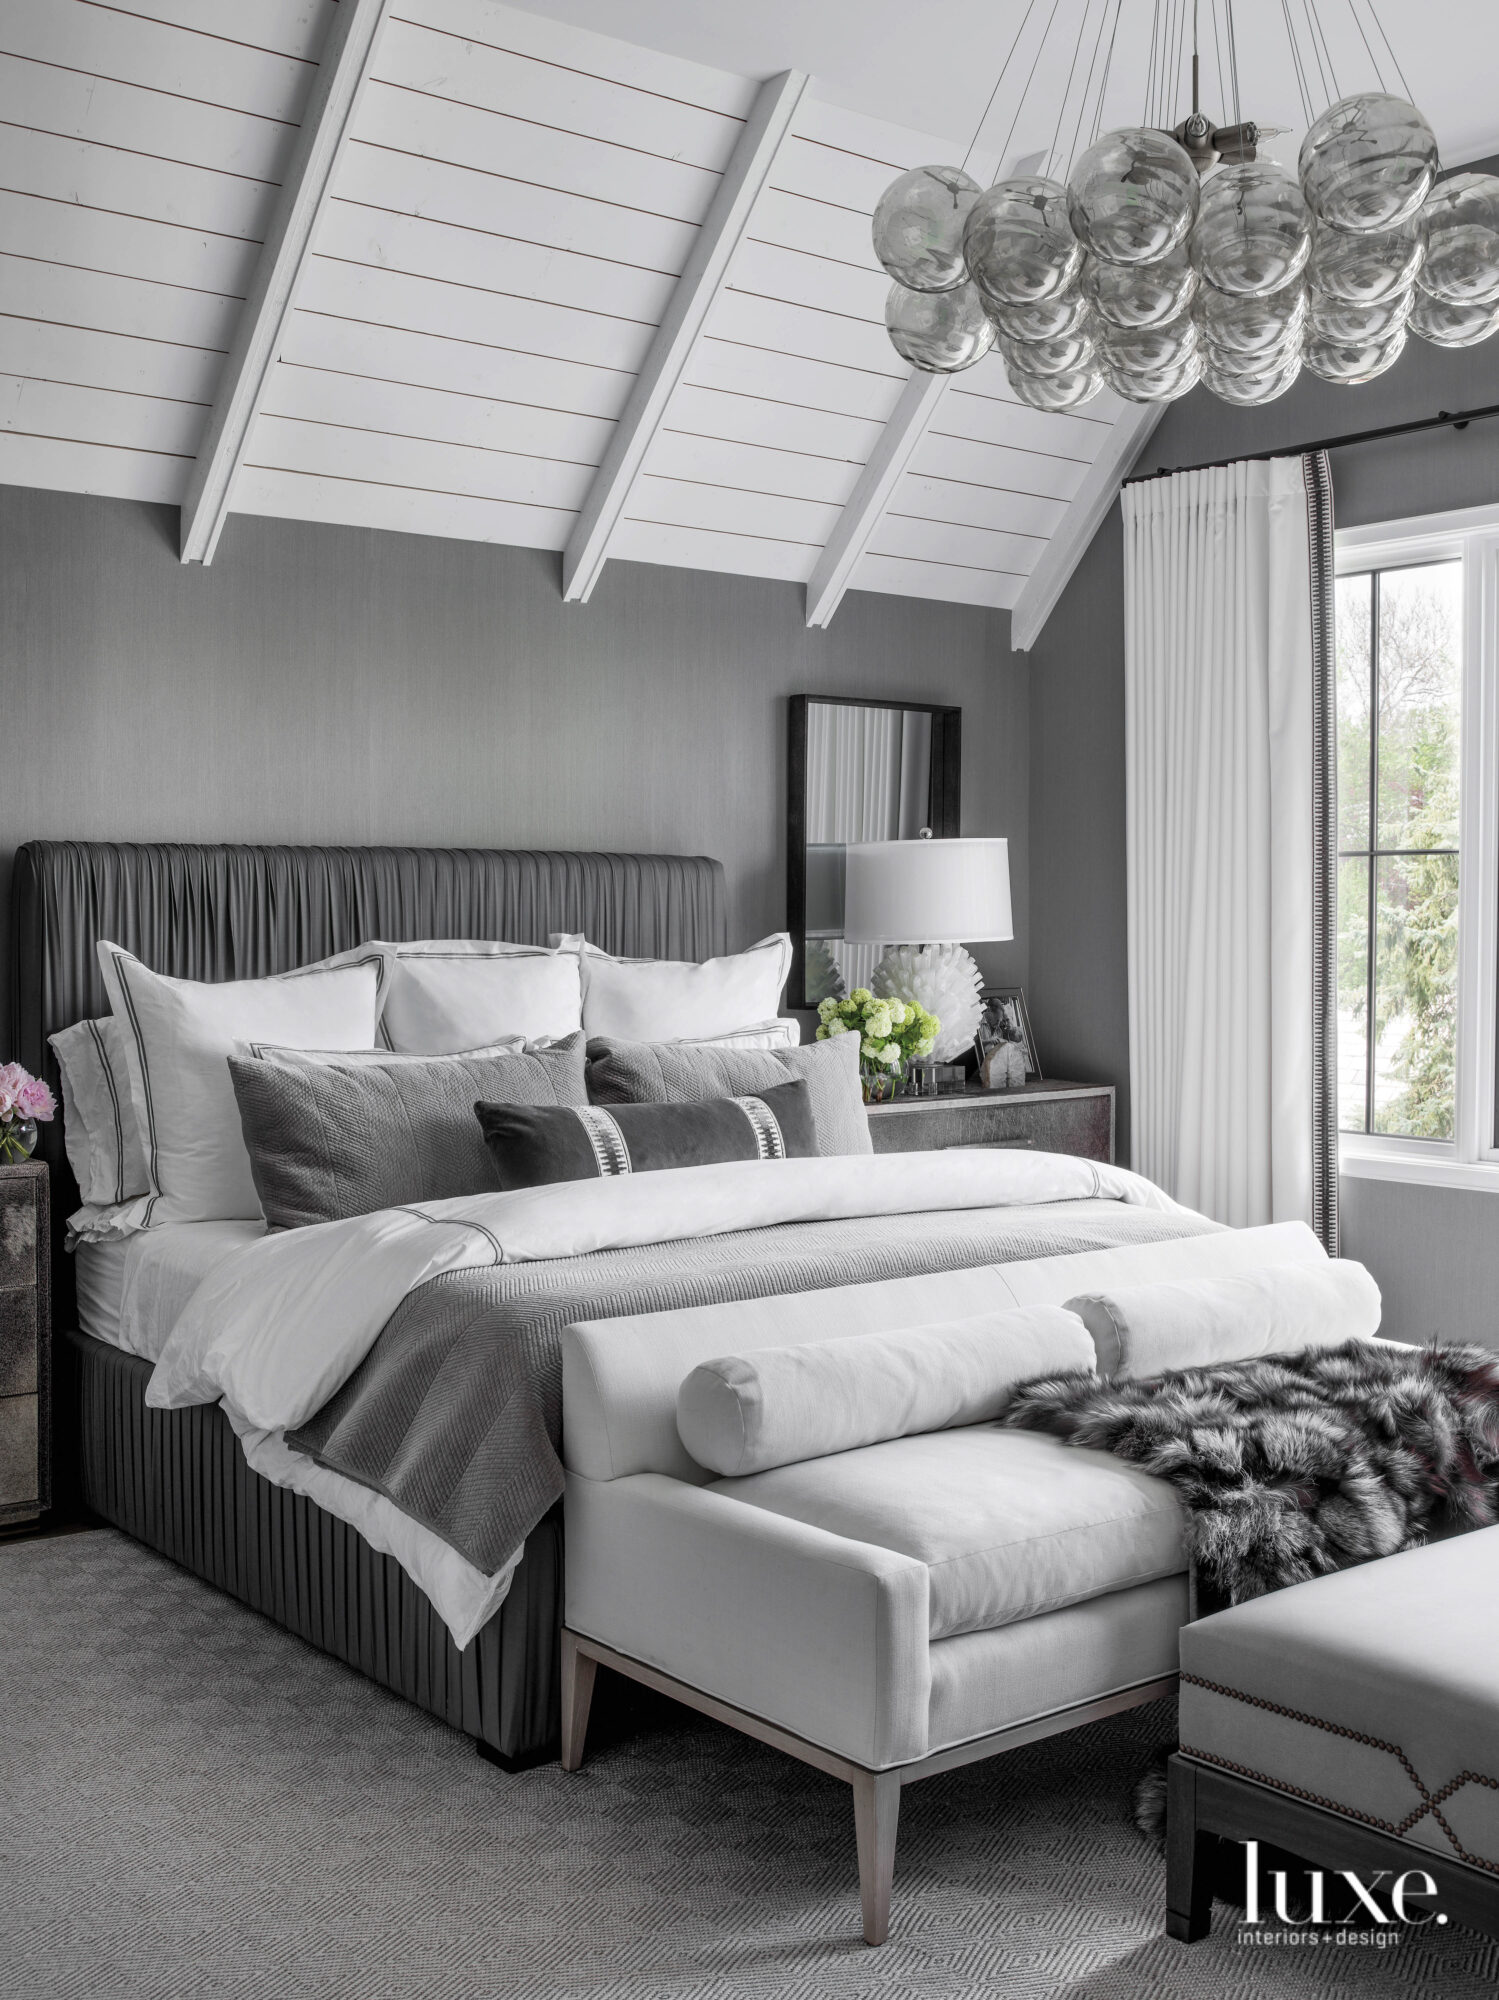 The clients' bedroom is done in shades of gray, including an upholstered sateen bed.